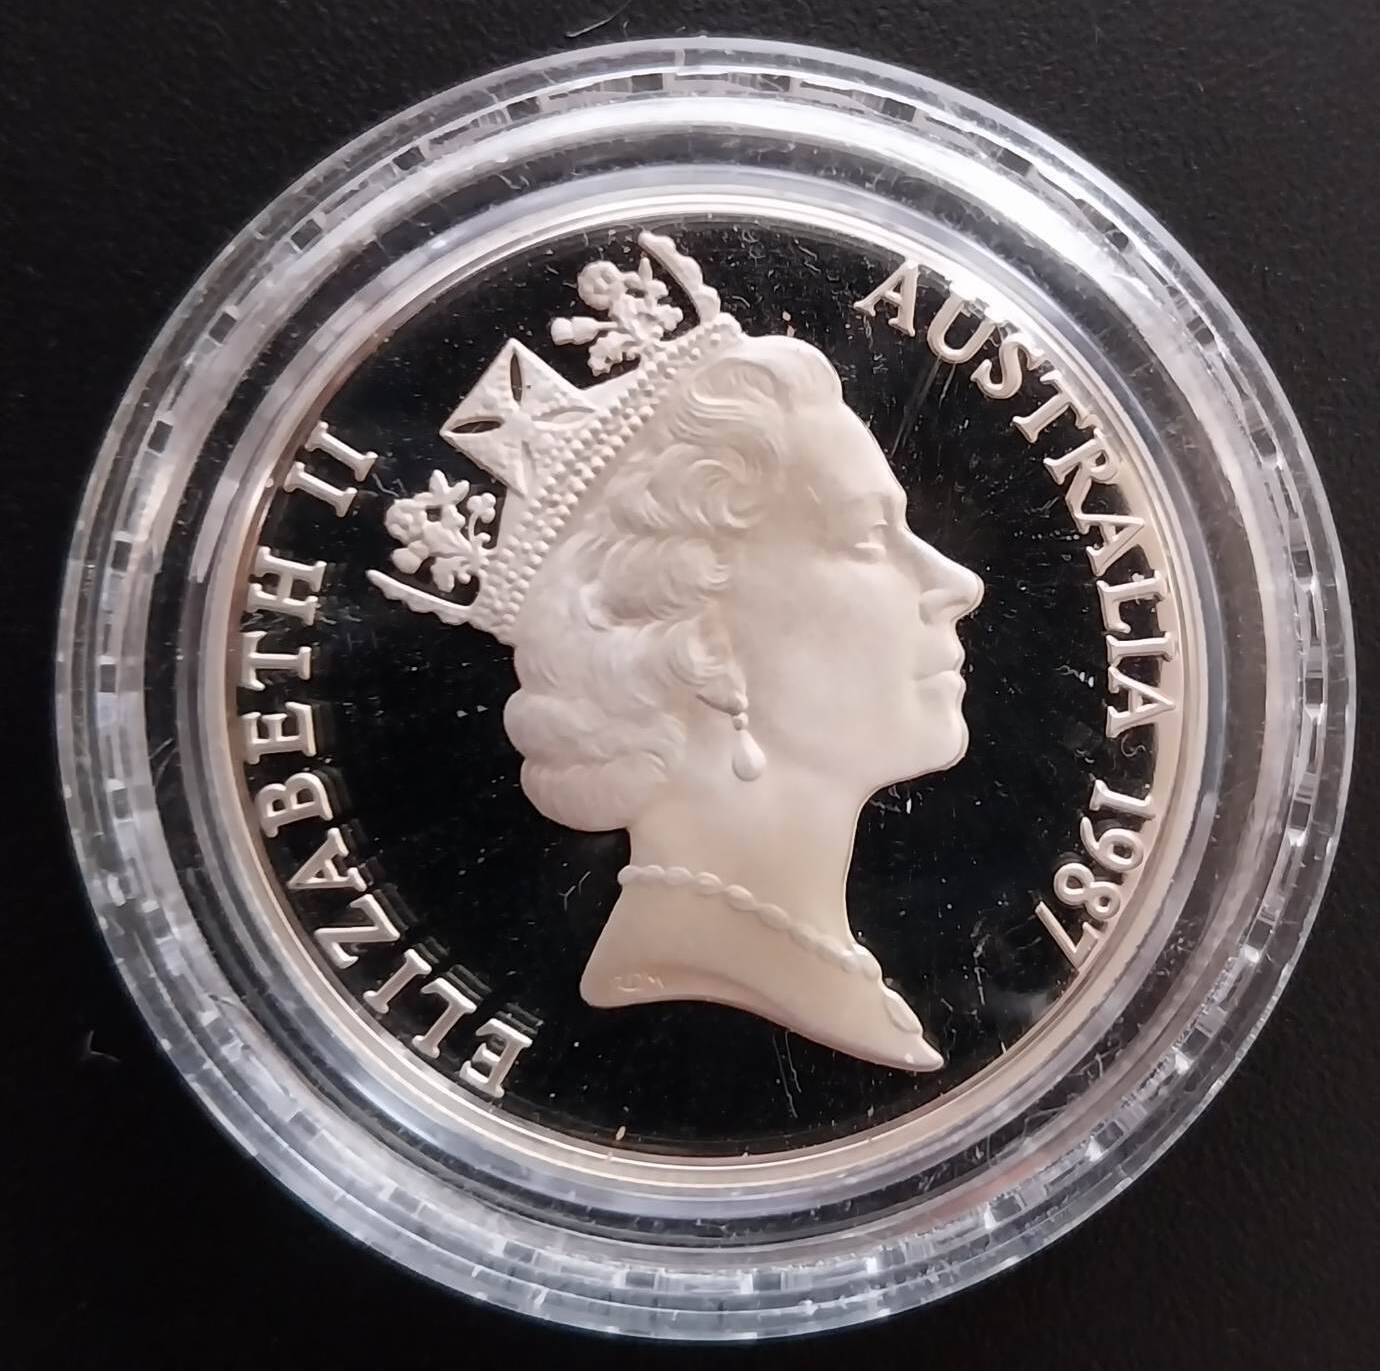 1987 $10 New South Wales Silver Proof Coin in capsule